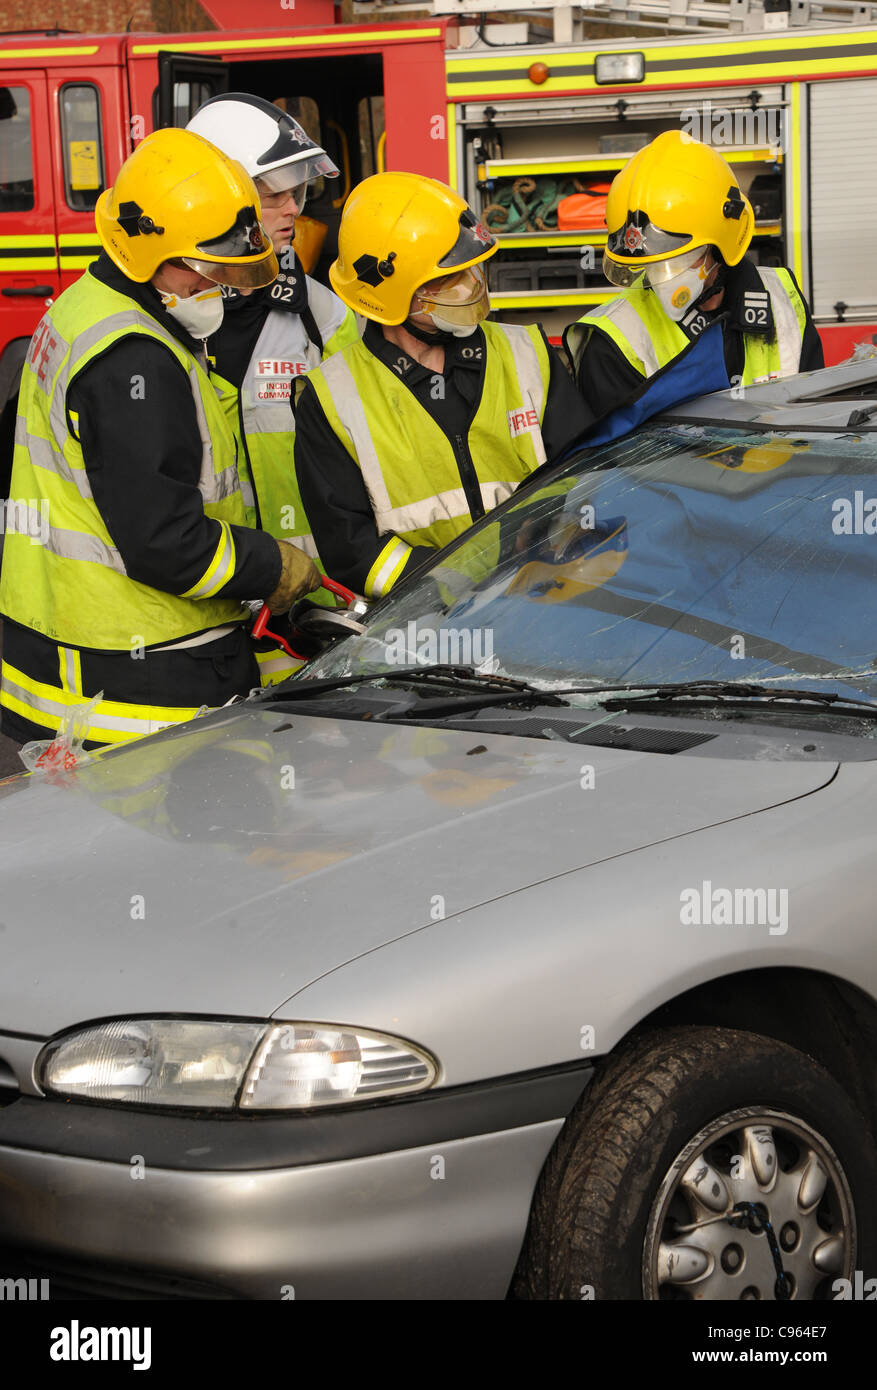 Fire service officers prepare to cut a collision victim free from a car following a collision. UK December 2010. Stock Photo